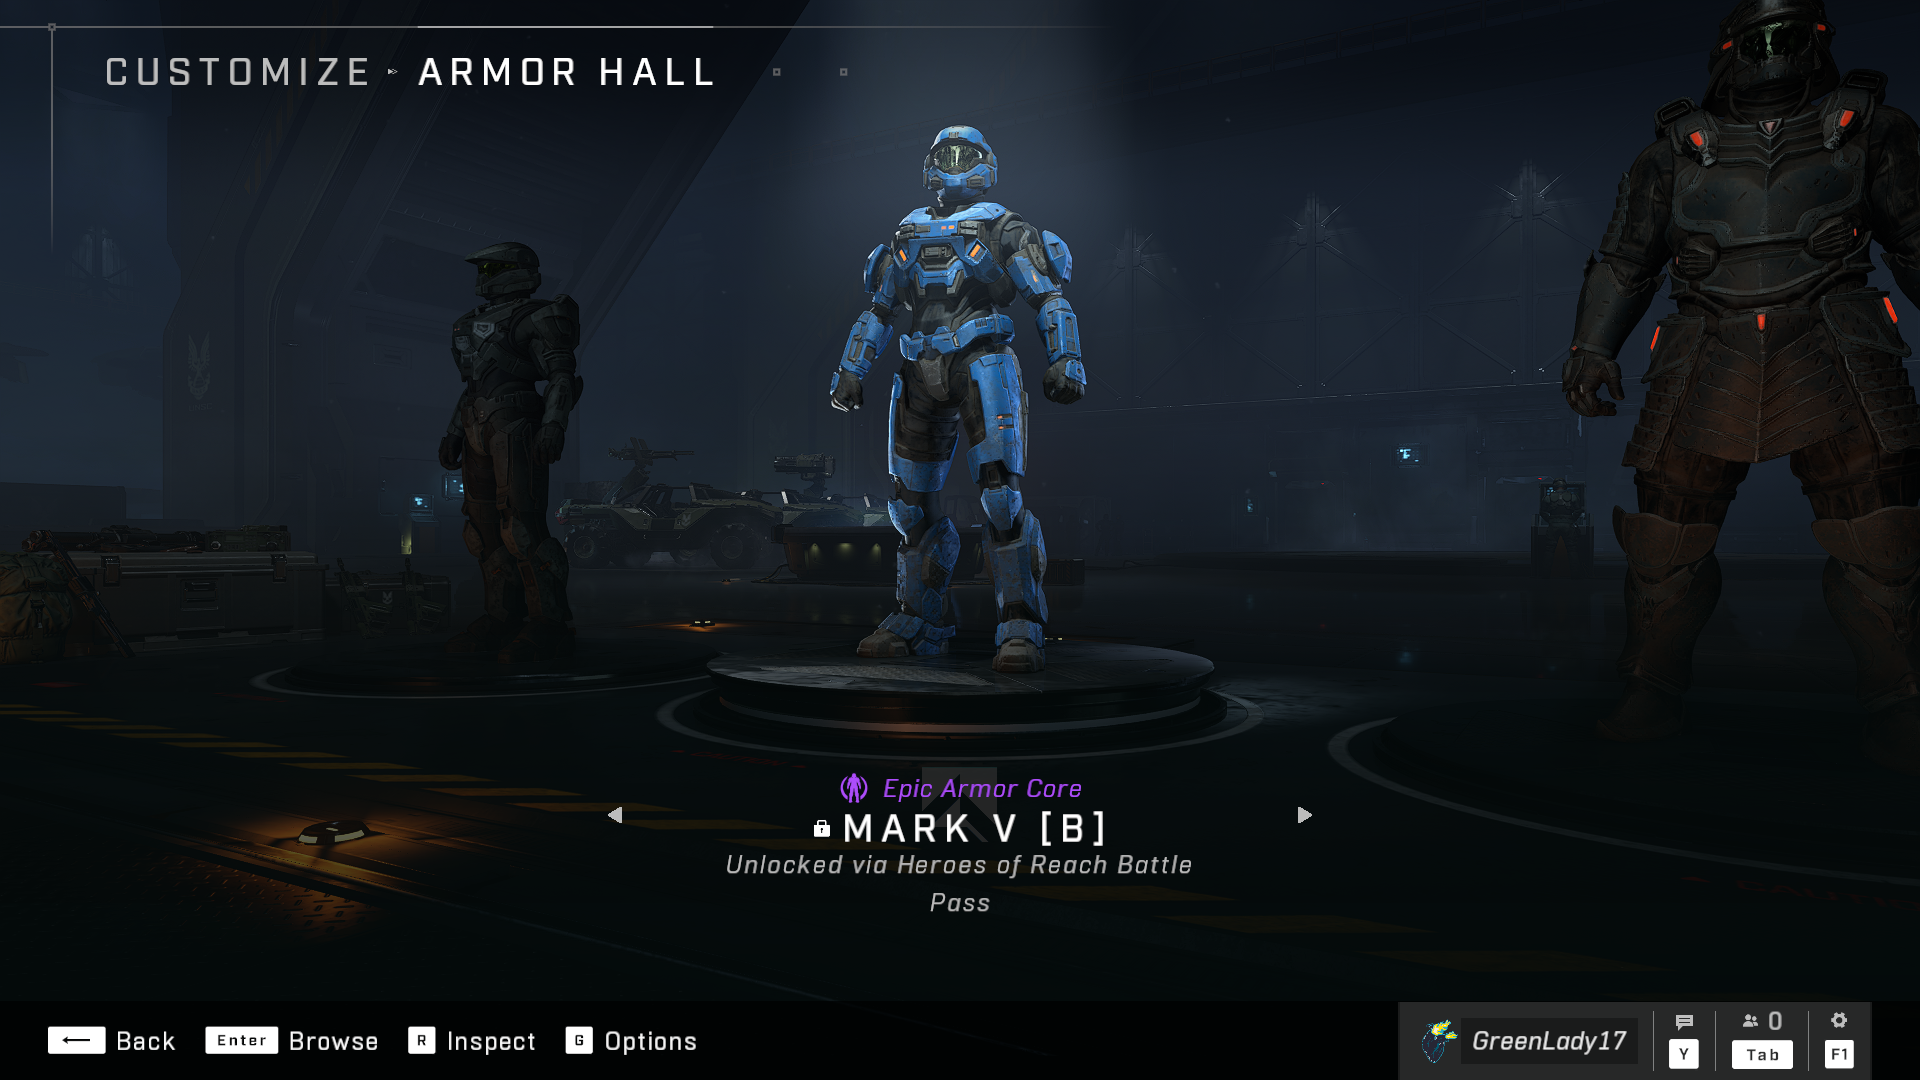 The Armor Hall from Halo Infinite, with the Mark V (B) Armor in the spotlight.